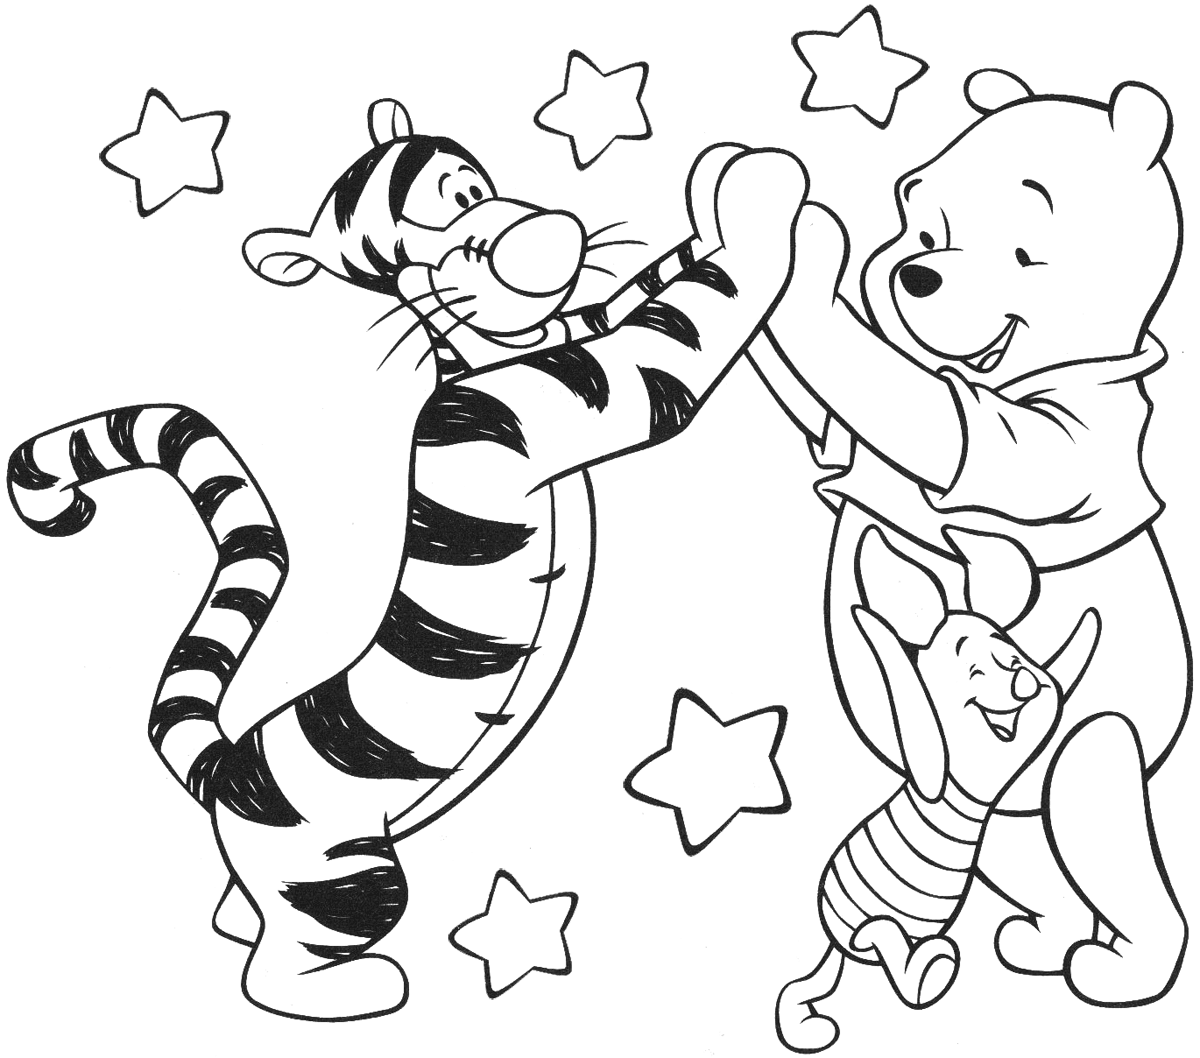 Tigger and Winnie the Pooh coloring book to print and online